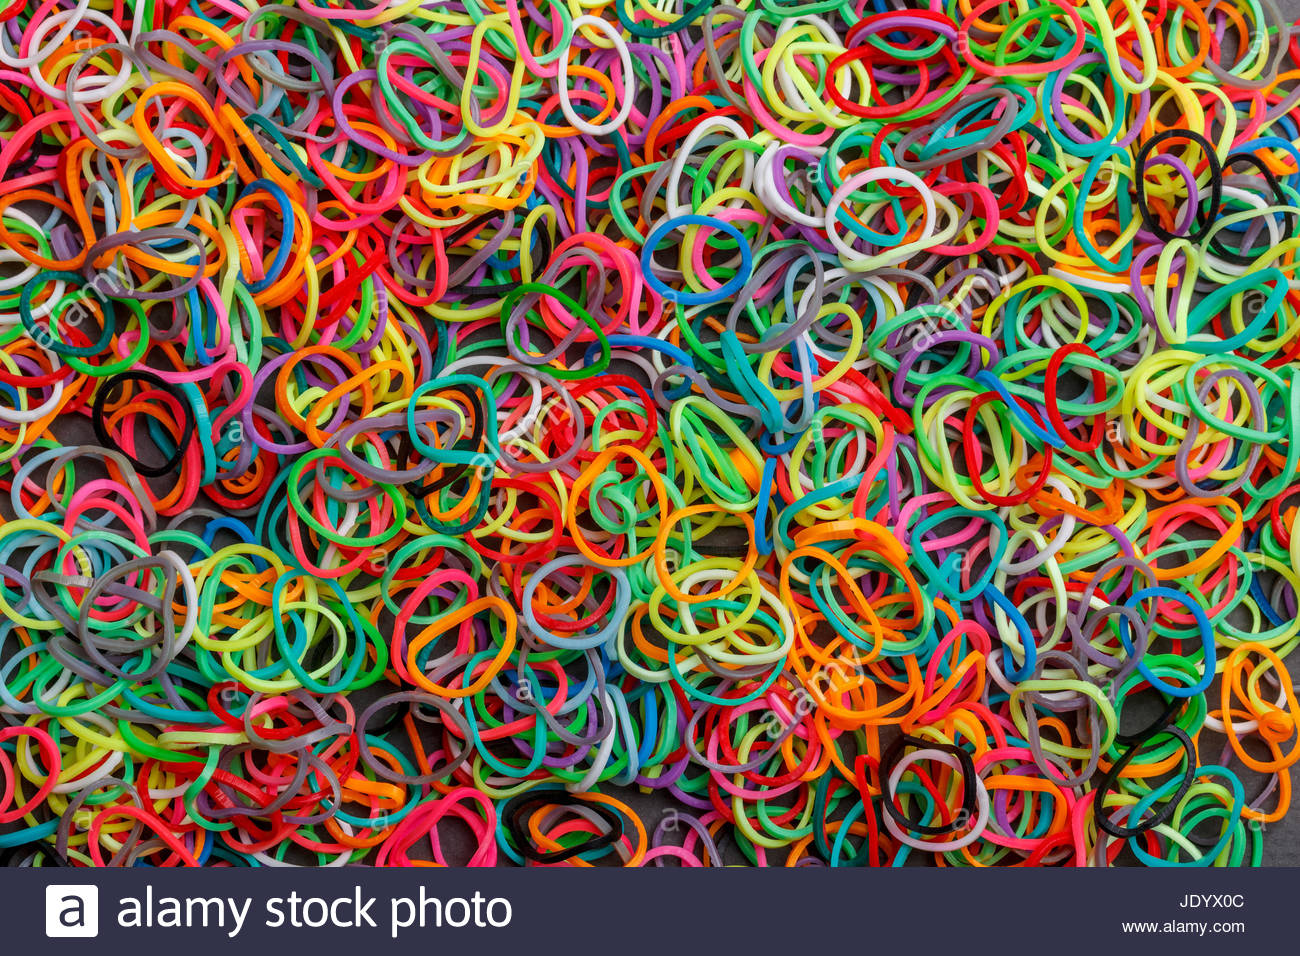 Colorful Background Rainbow Colors Rubber Bands Loom Stock Photo